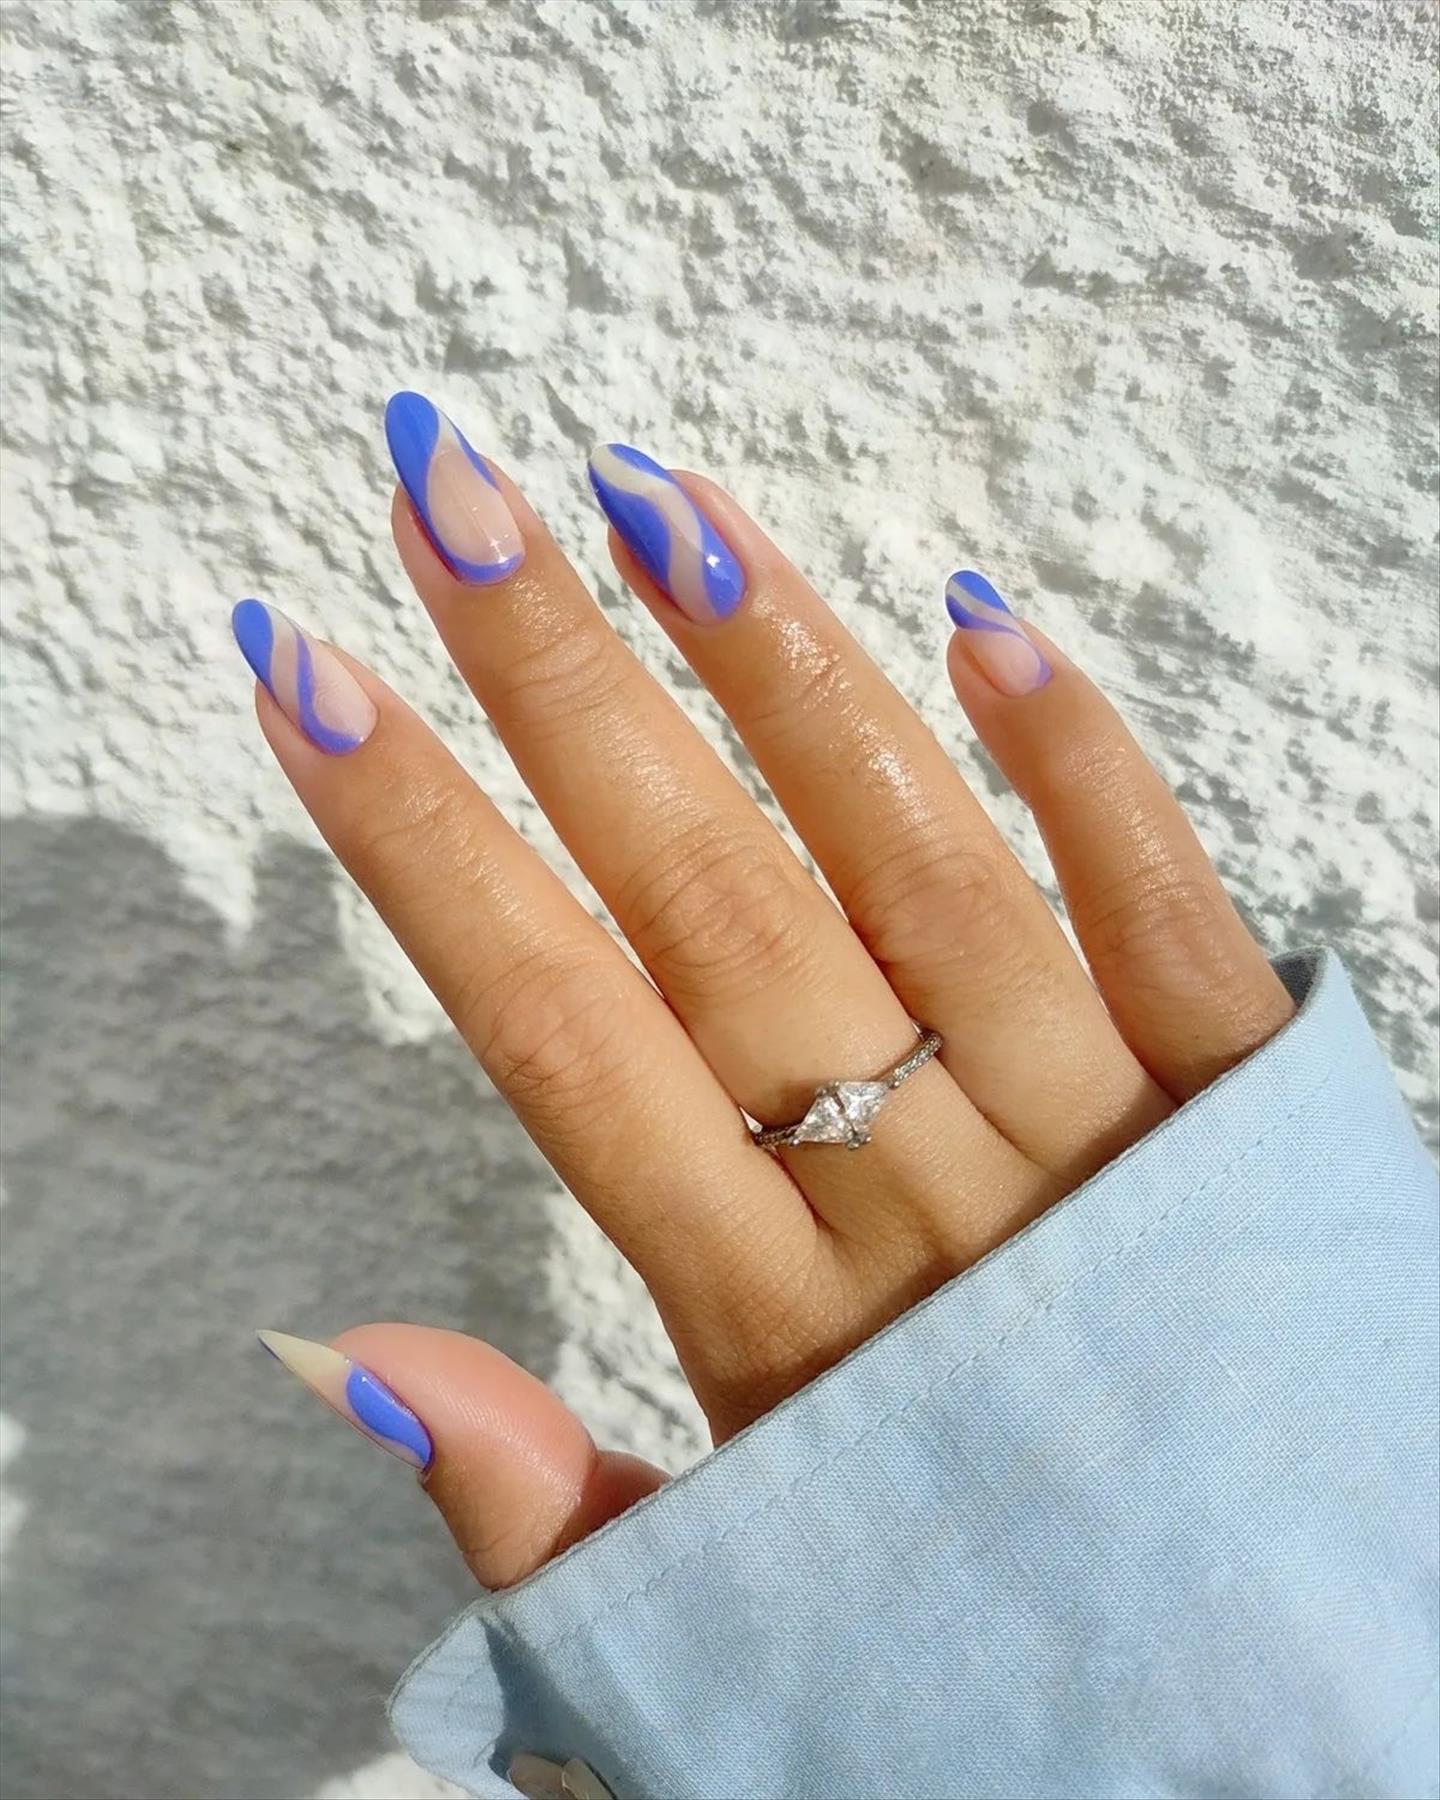 Adorable Short Blue Nails Ideas for Cooler Vibes in 2022!